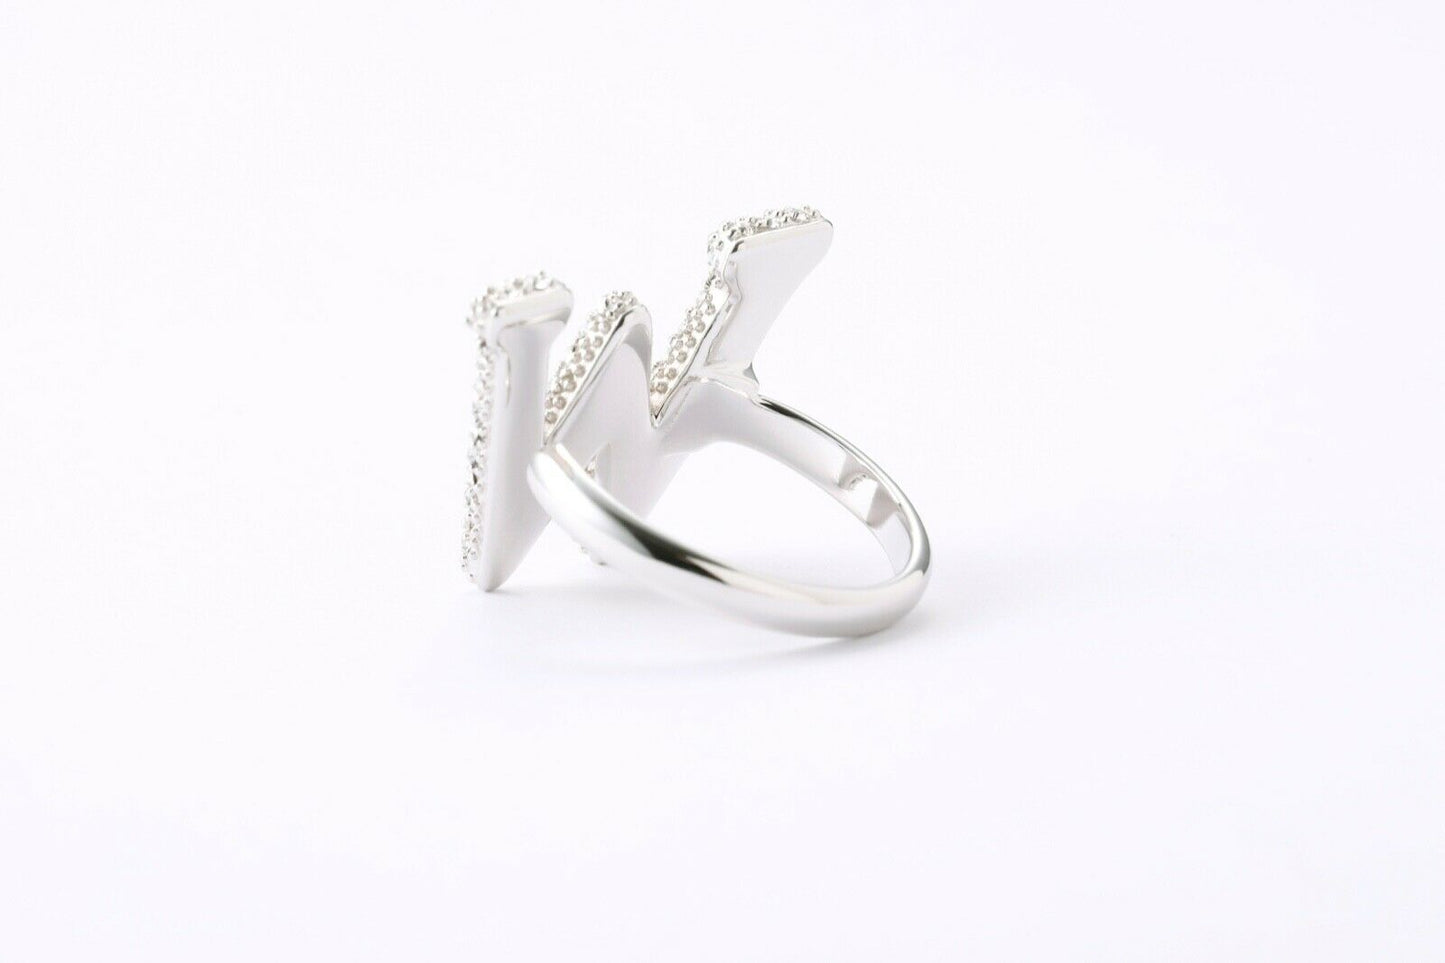 Alphabet Ring Initial W Swarovski Crystals Free Size Sterling Silver 925 Rhodium Plated